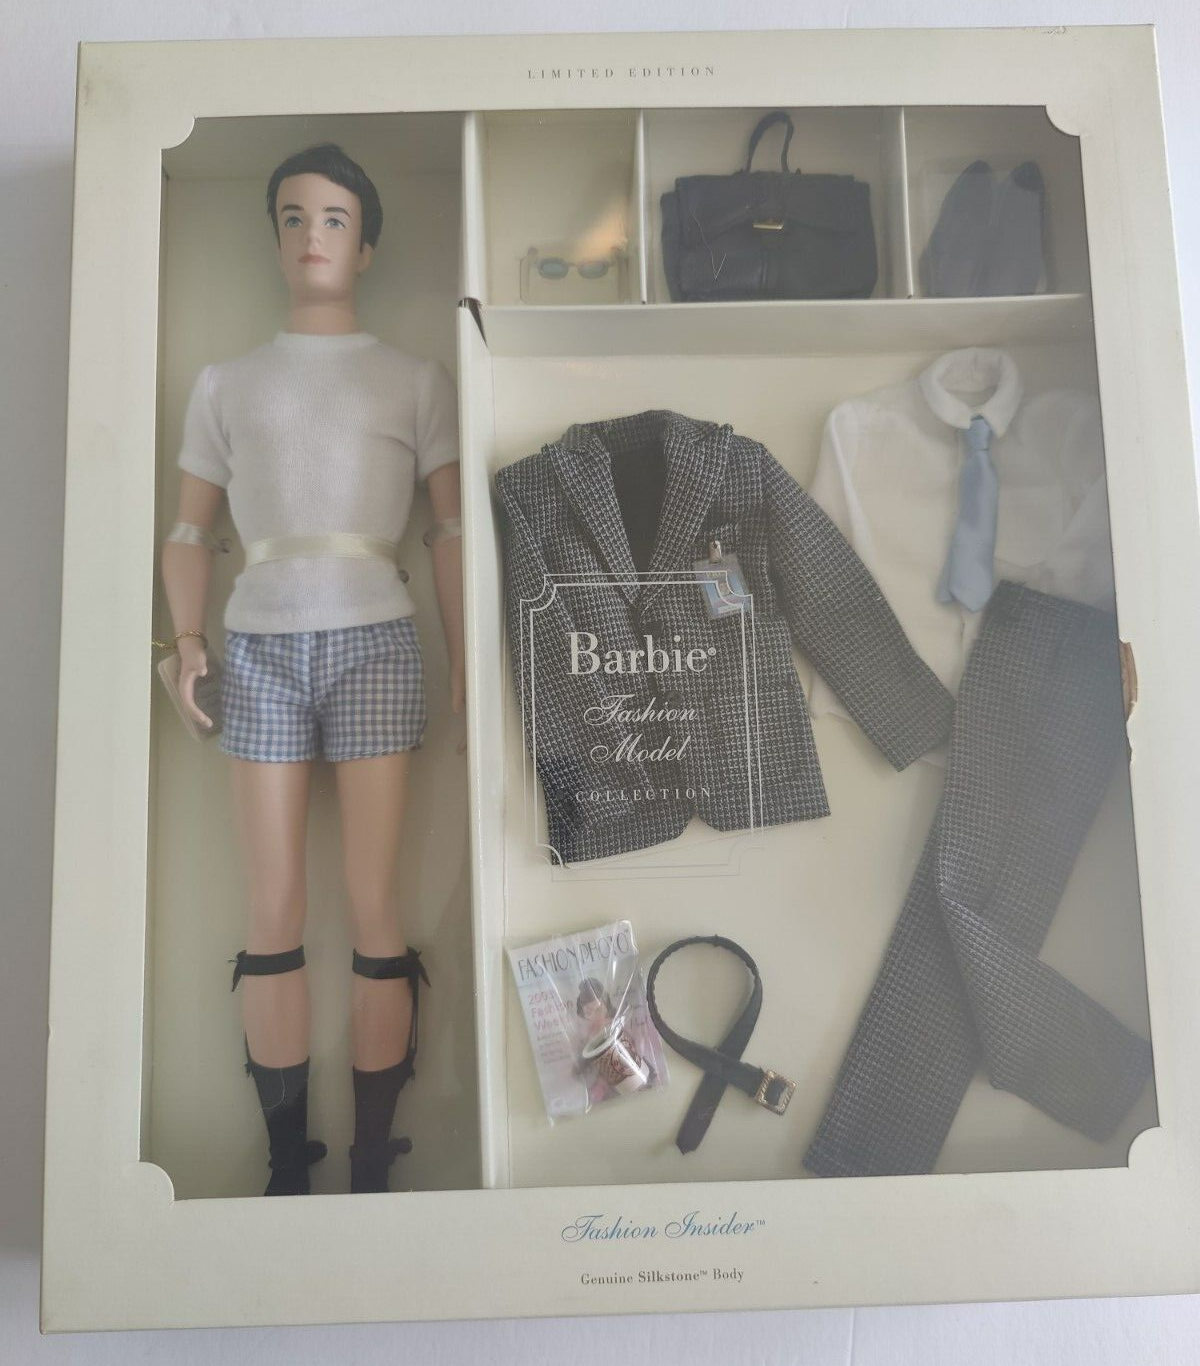 Primary image for Barbie Fashion Insider Silkstone Ken Doll Set Fashion Model Collection 56706